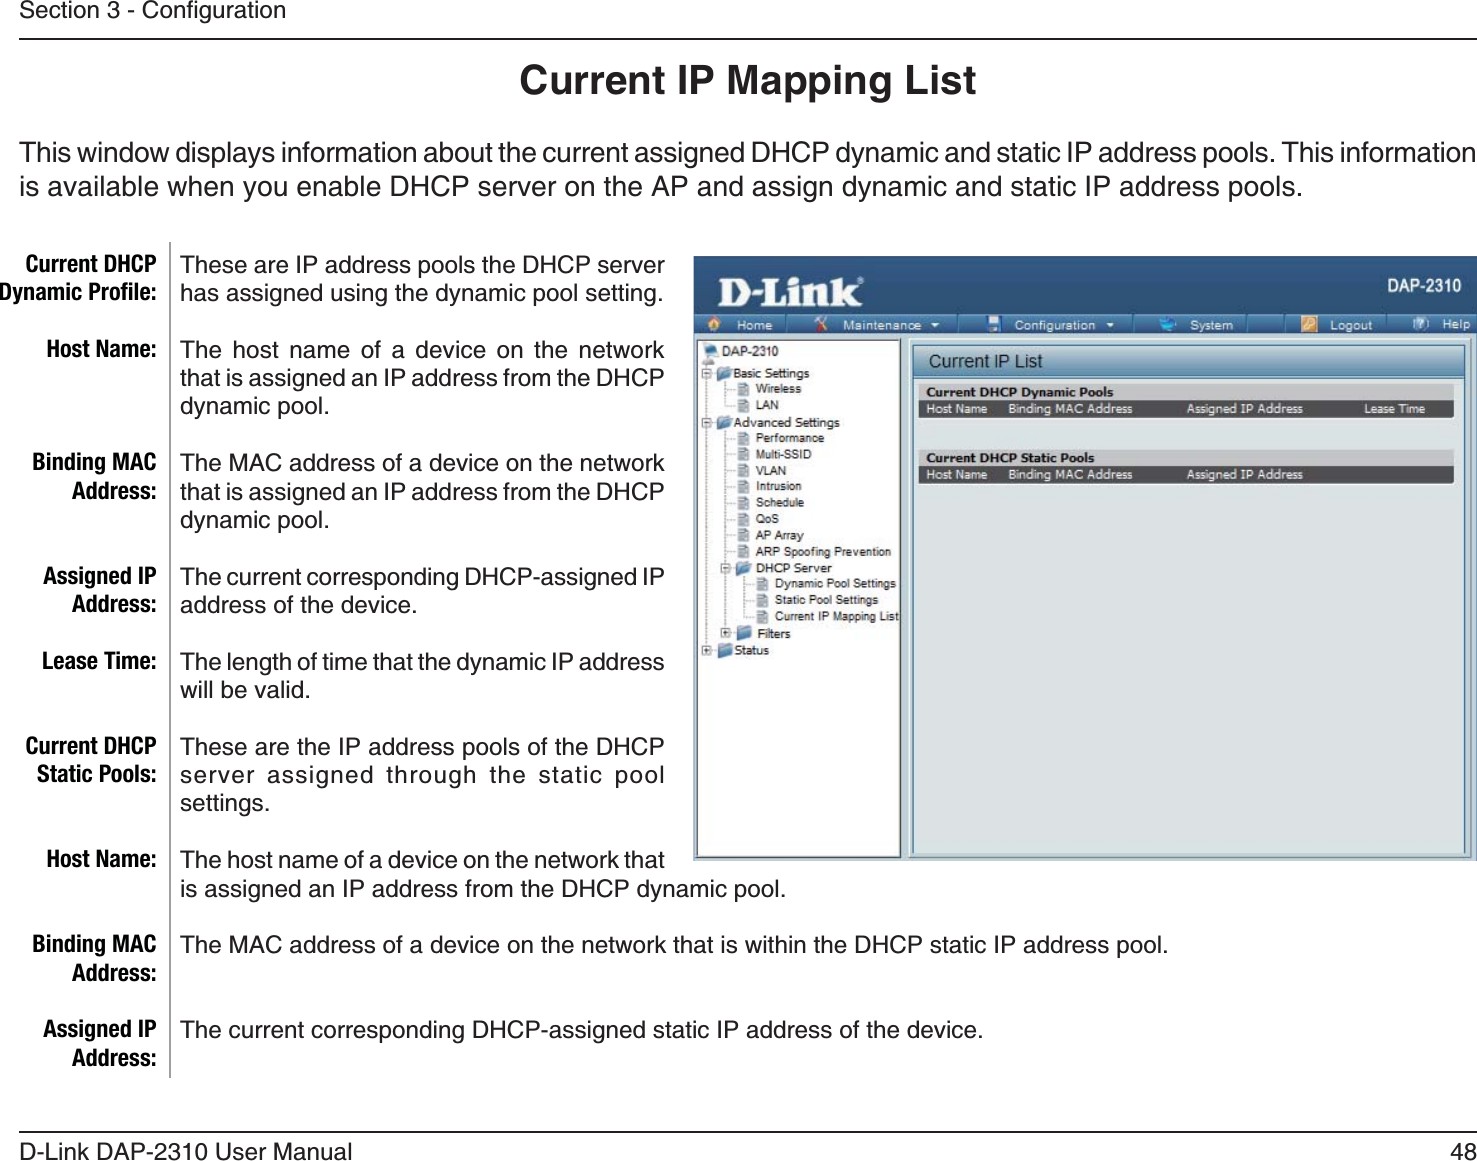 48D-Link DAP-2310 User ManualCurrent IP Mapping ListThis window displays information about the current assigned DHCP dynamic and static IP address pools. This information is available when you enable DHCP server on the AP and assign dynamic and static IP address pools.These are IP address pools the DHCP server has assigned using the dynamic pool setting. The host name of a device on the network that is assigned an IP address from the DHCP dynamic pool.The MAC address of a device on the network that is assigned an IP address from the DHCP dynamic pool.The current corresponding DHCP-assigned IP address of the device.The length of time that the dynamic IP address will be valid.These are the IP address pools of the DHCP server assigned through the static pool settings. The host name of a device on the network that is assigned an IP address from the DHCP dynamic pool.The MAC address of a device on the network that is within the DHCP static IP address pool.The current corresponding DHCP-assigned static IP address of the device.Current DHCP Dynamic Proﬁle:Host Name:Binding MAC Address:Assigned IP Address:Lease Time:Current DHCP Static Pools:Host Name:Binding MAC Address:Assigned IP Address: